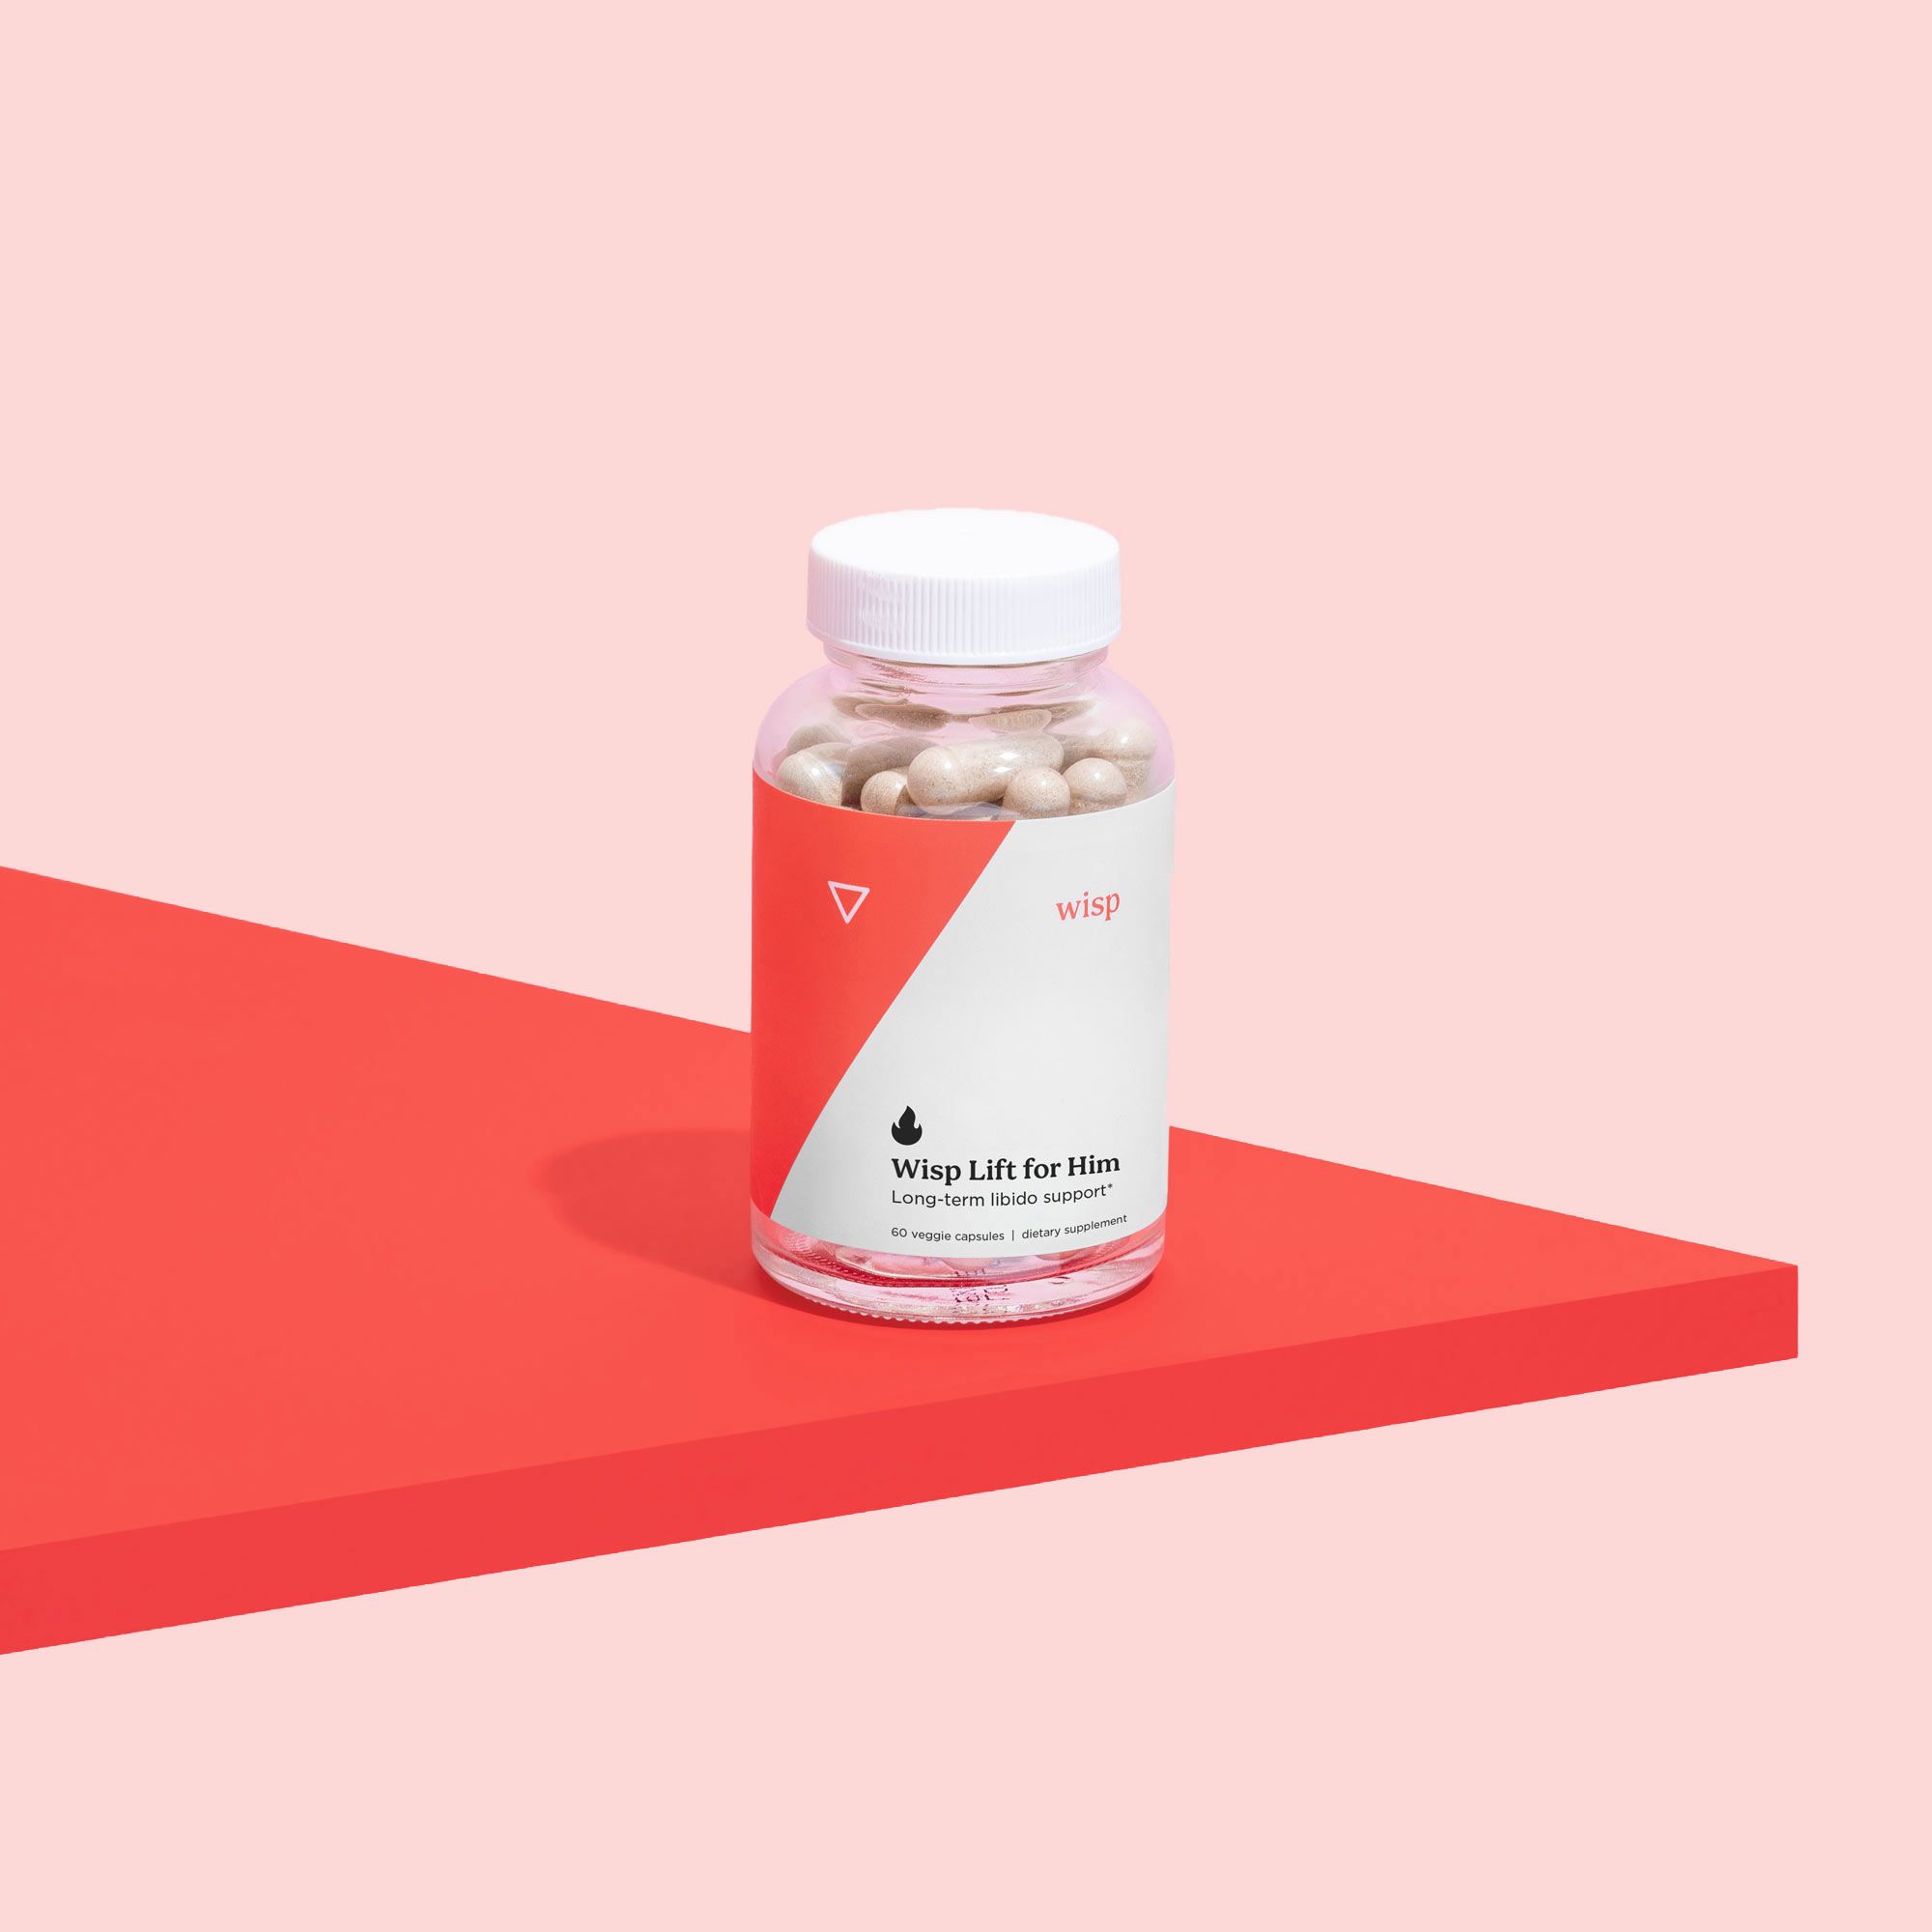 Wisp Lift Libido Supplements for Him on a red shelf with a pink background